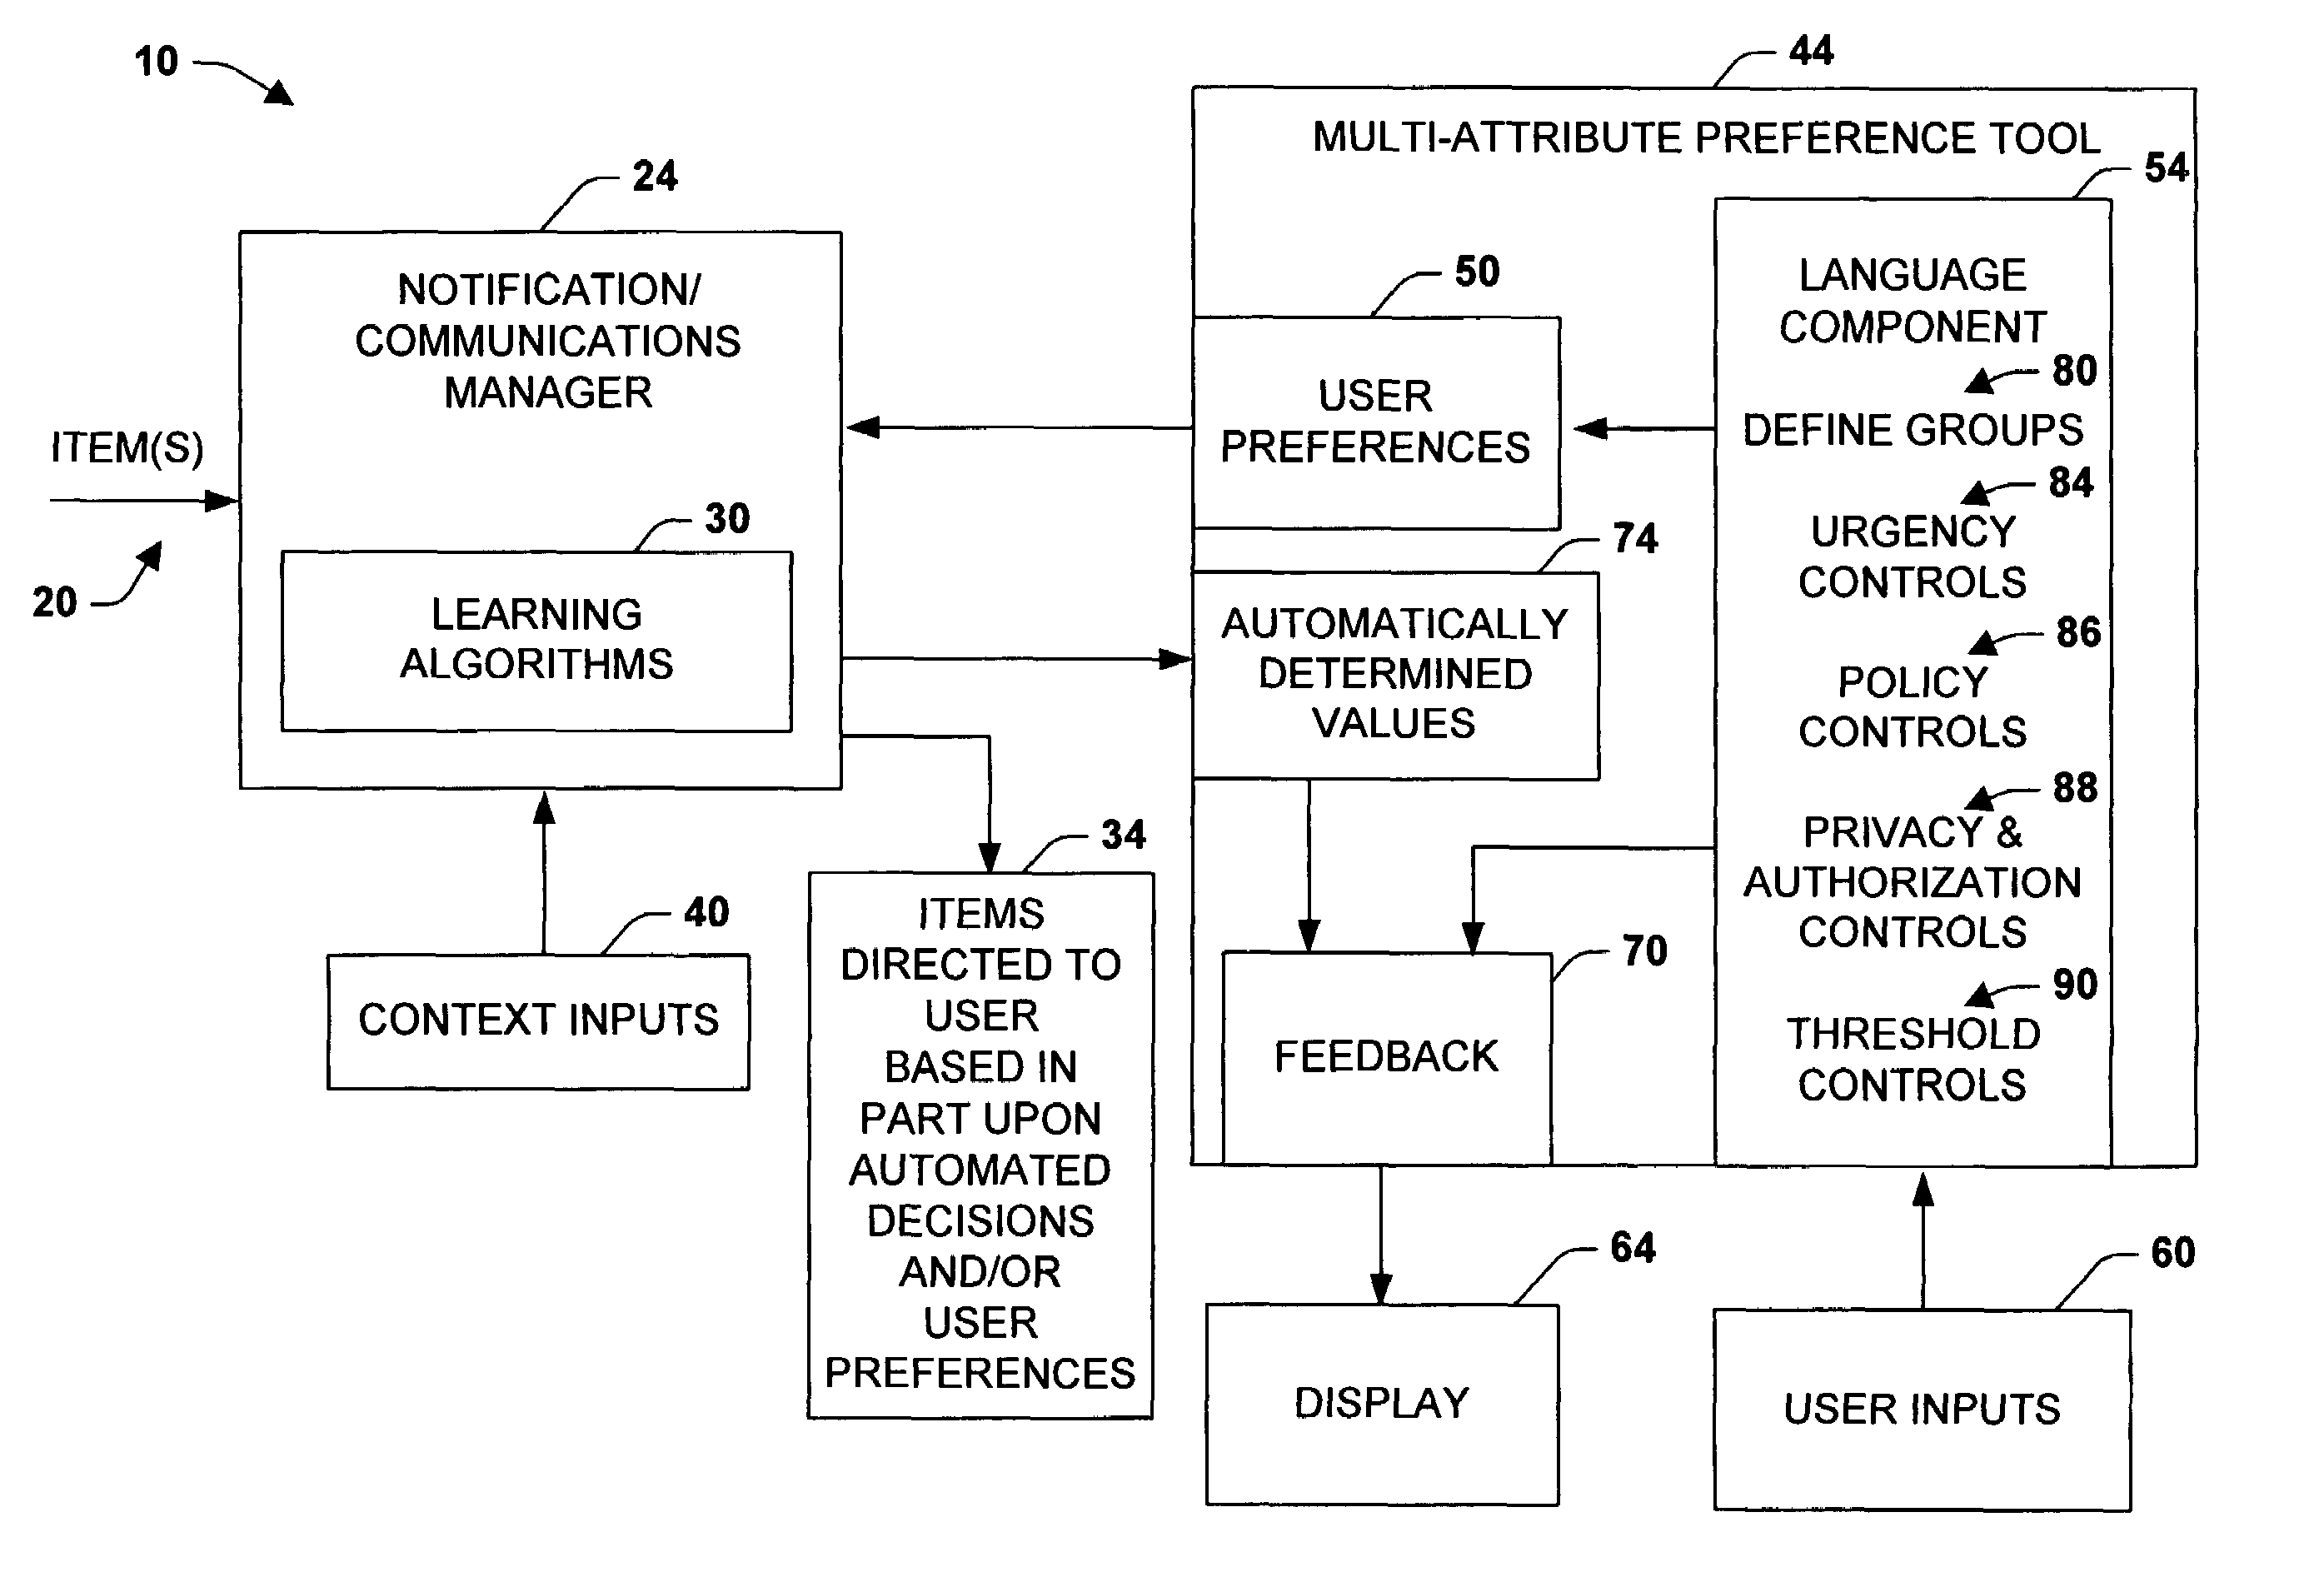 Multi-attribute specification of preferences about people, priorities and privacy for guiding messaging and communications